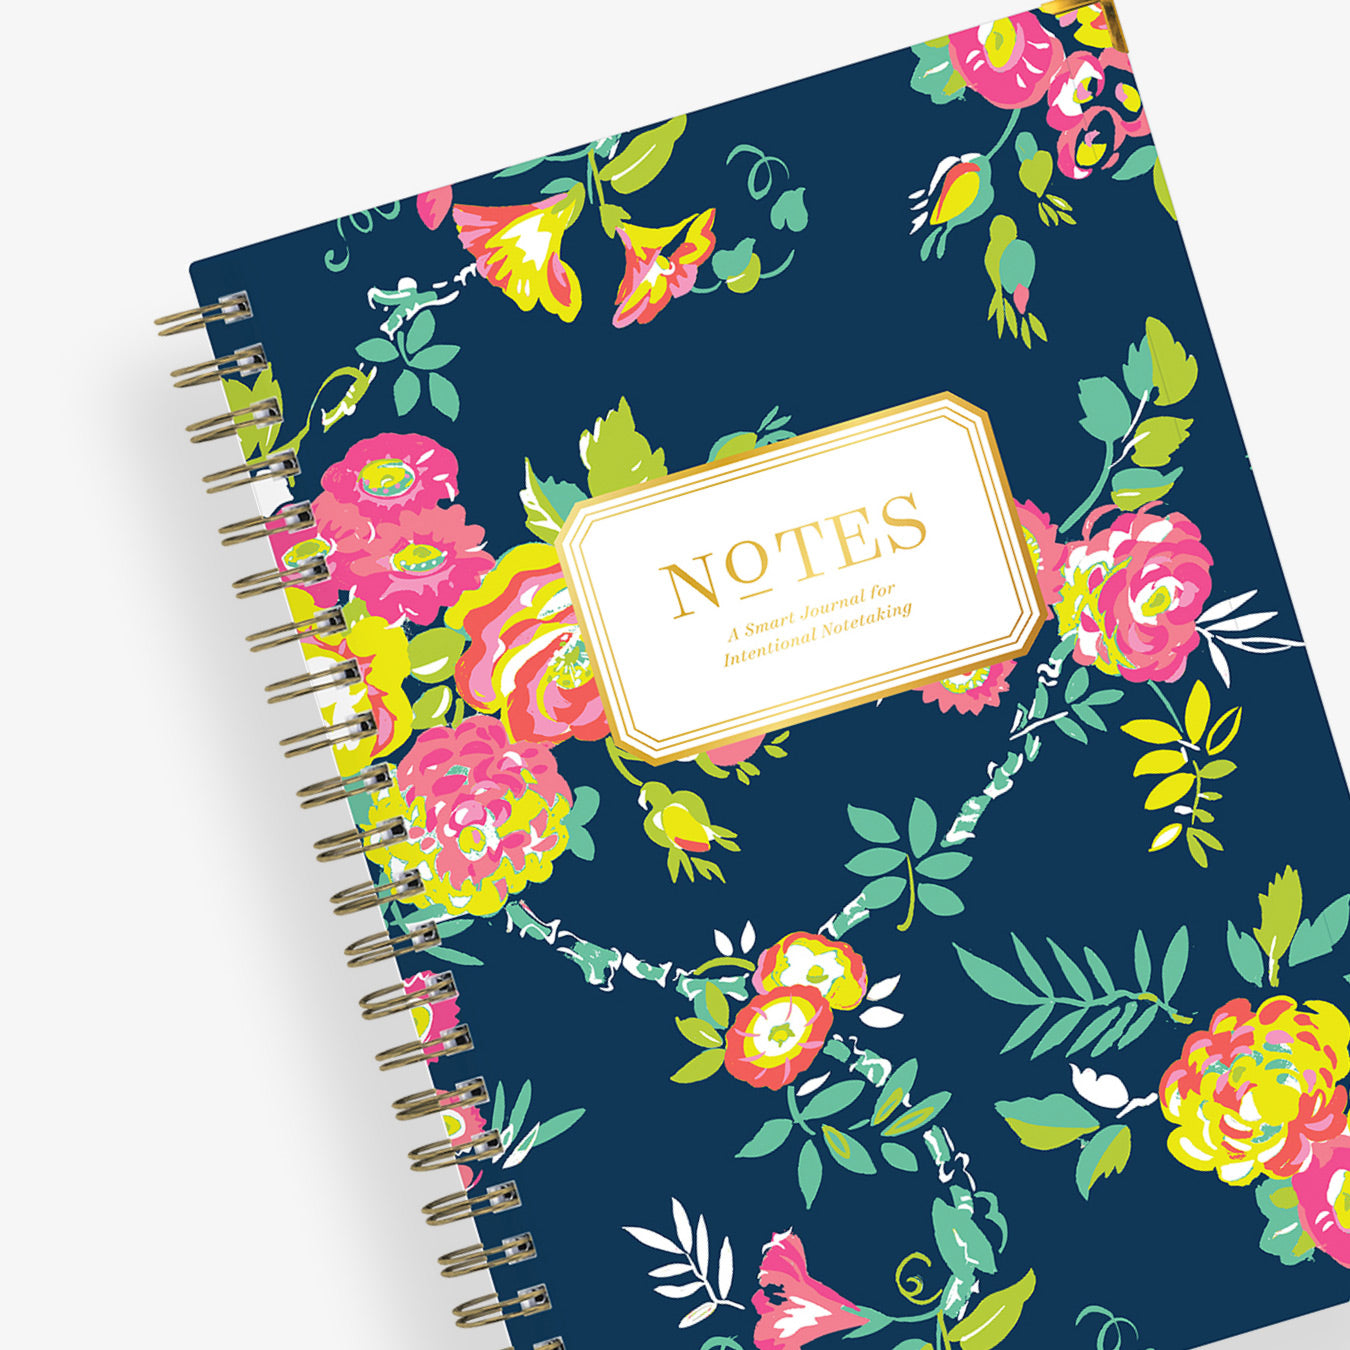 Navy Floral Five Year Journal Written 1 Line a Day – Aquablue